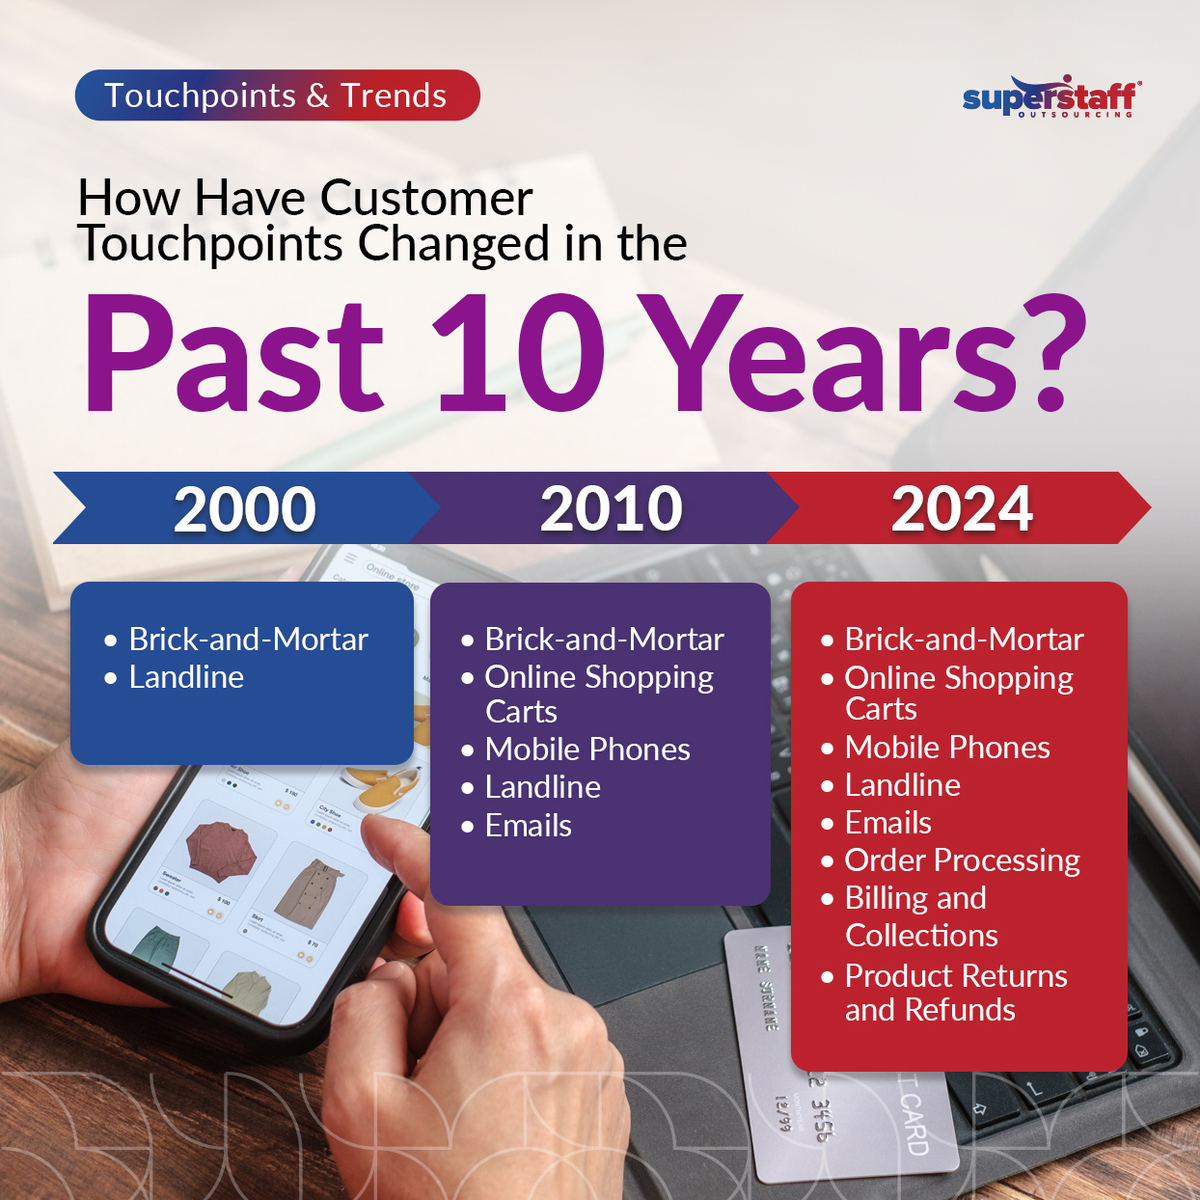 An image shows timeline of how customer touchpoints have changed in the past 10 years.